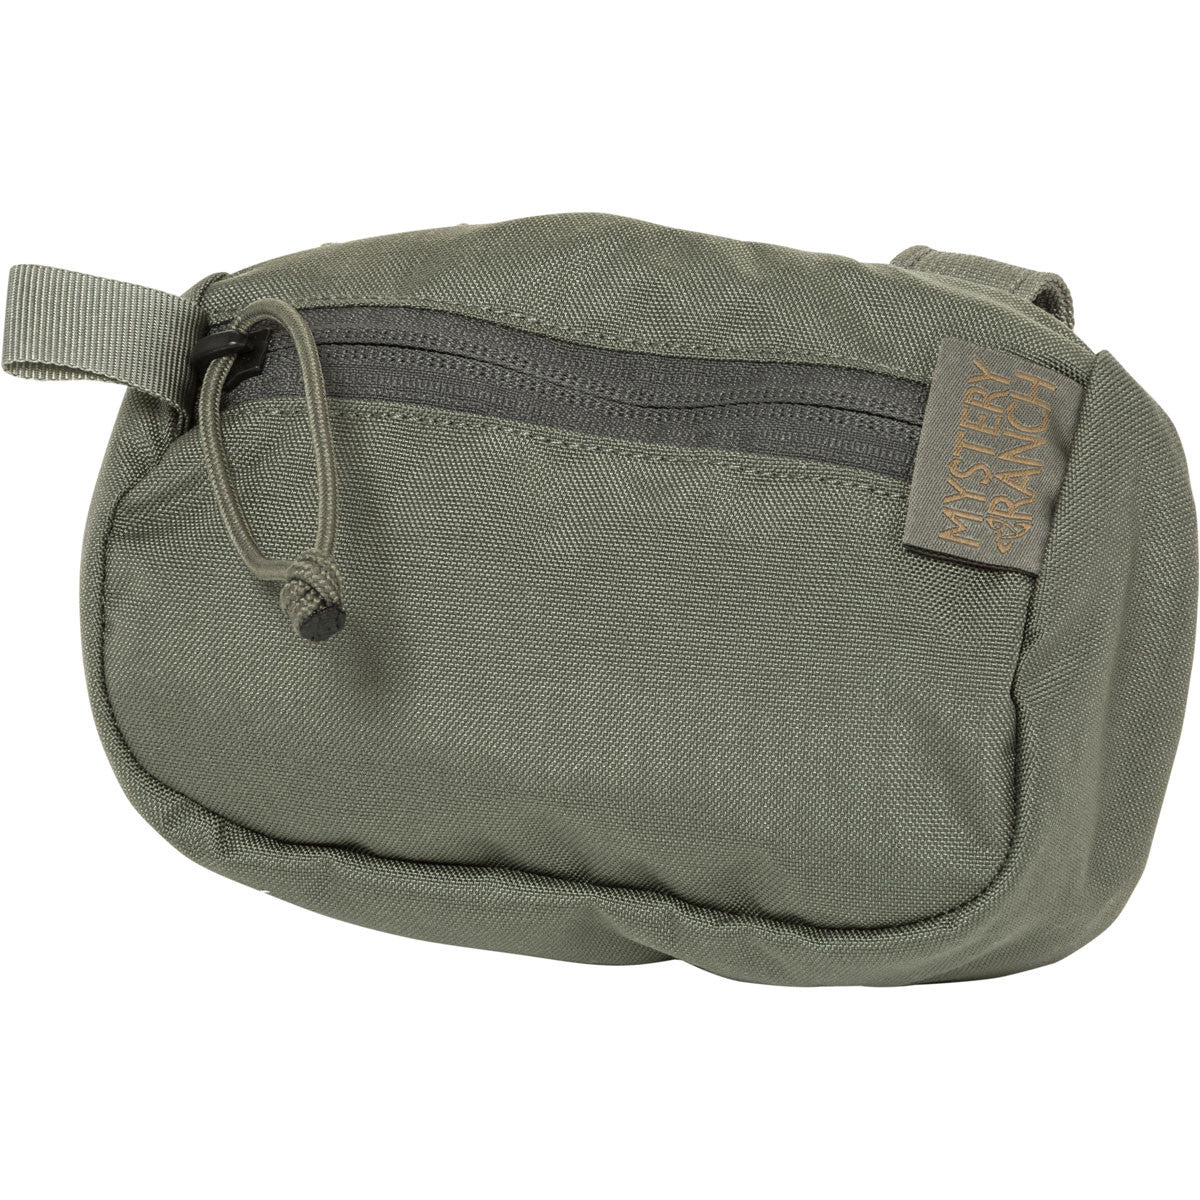 Mystery Ranch Forager Pocket Foliage Large Hunting Packs